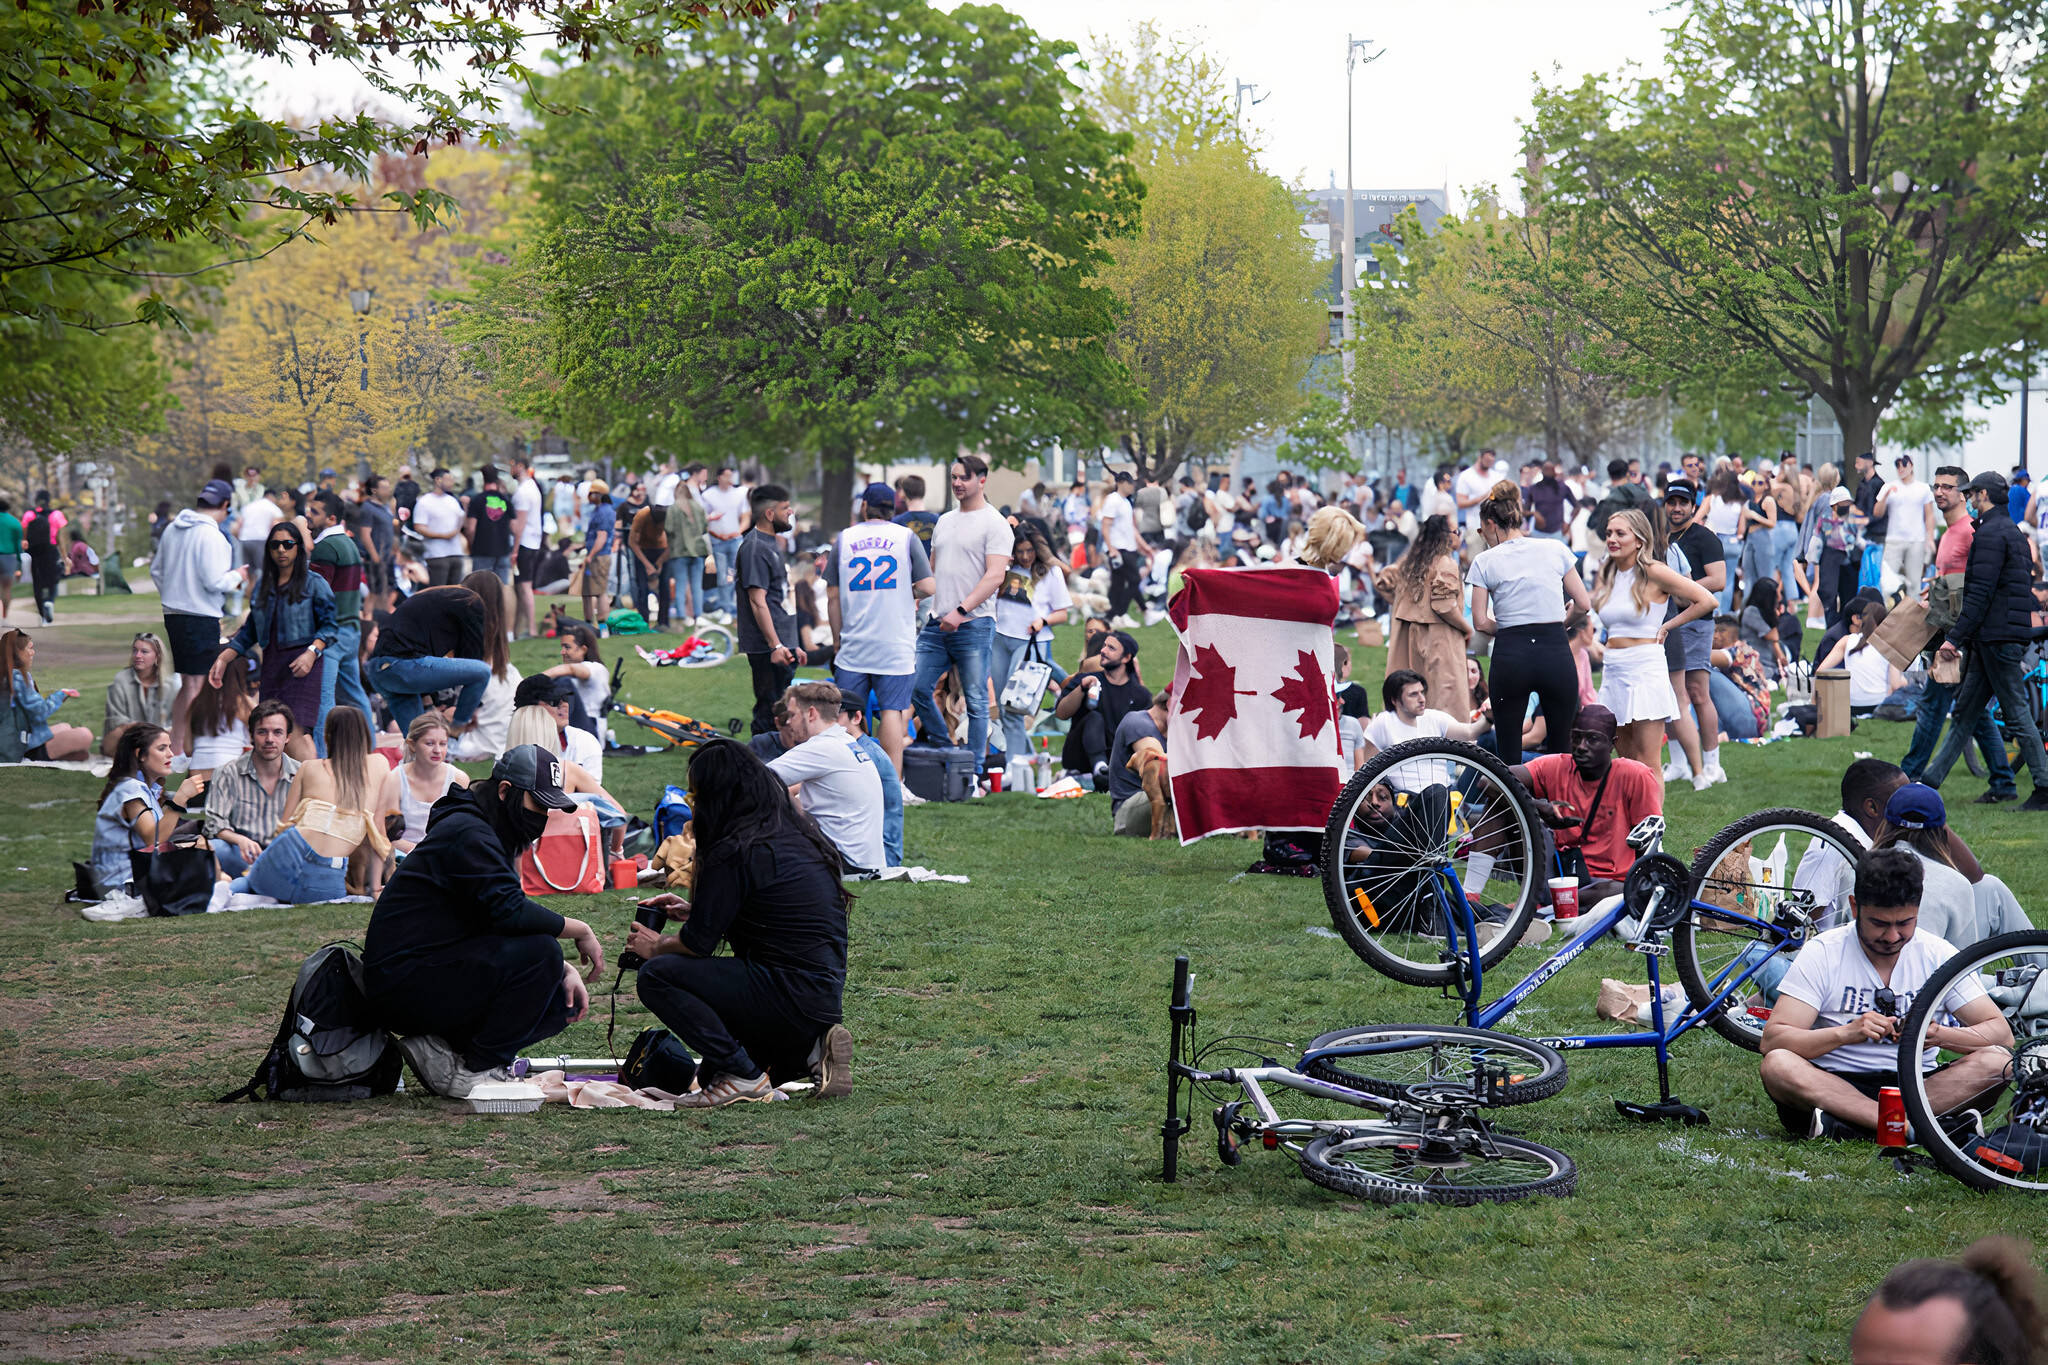 Toronto warns cases spike after long weekends and begs people to behave